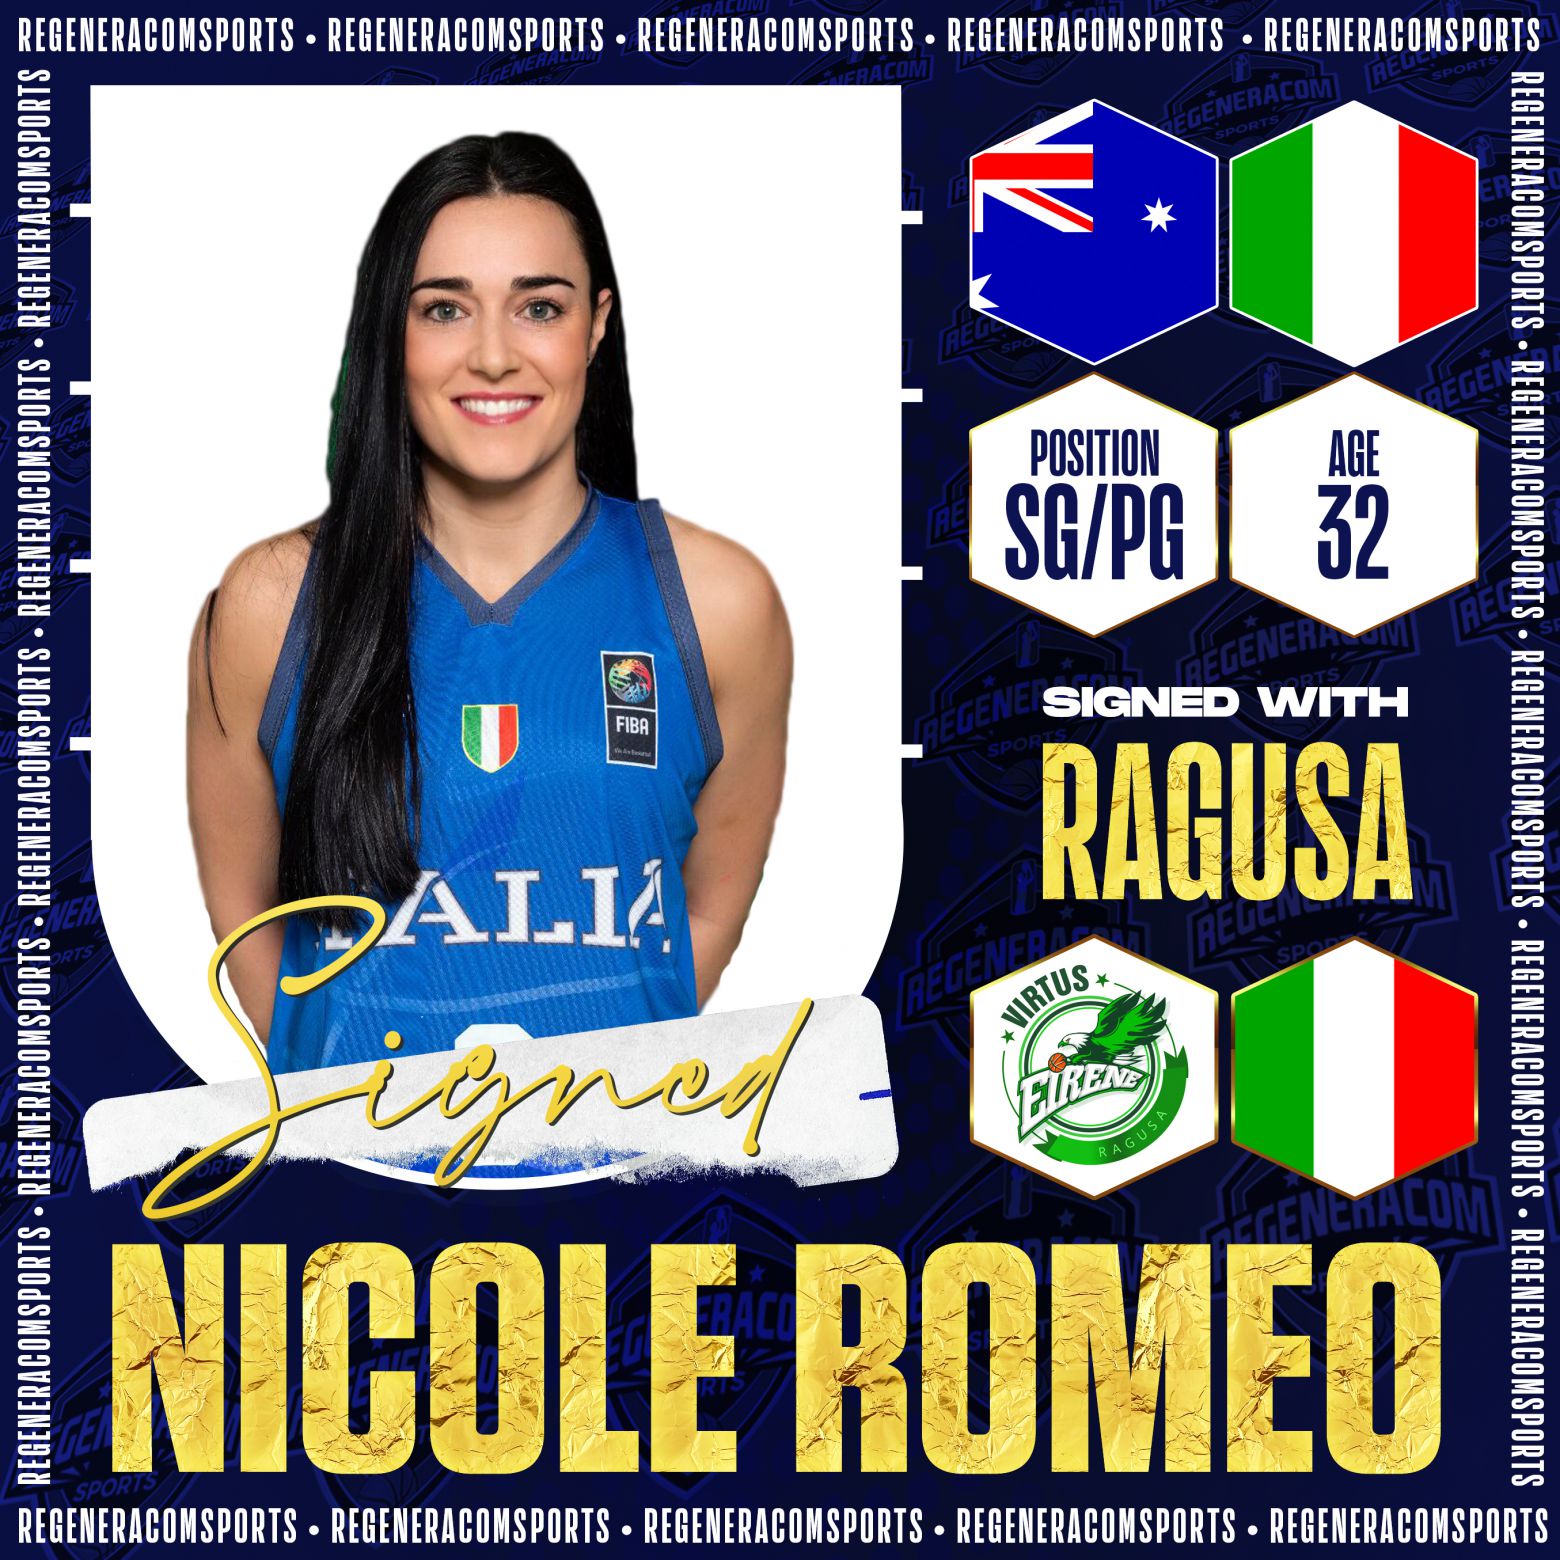 NICOLE ROMEO has re-signed with Ragusa for the 2022/23 season